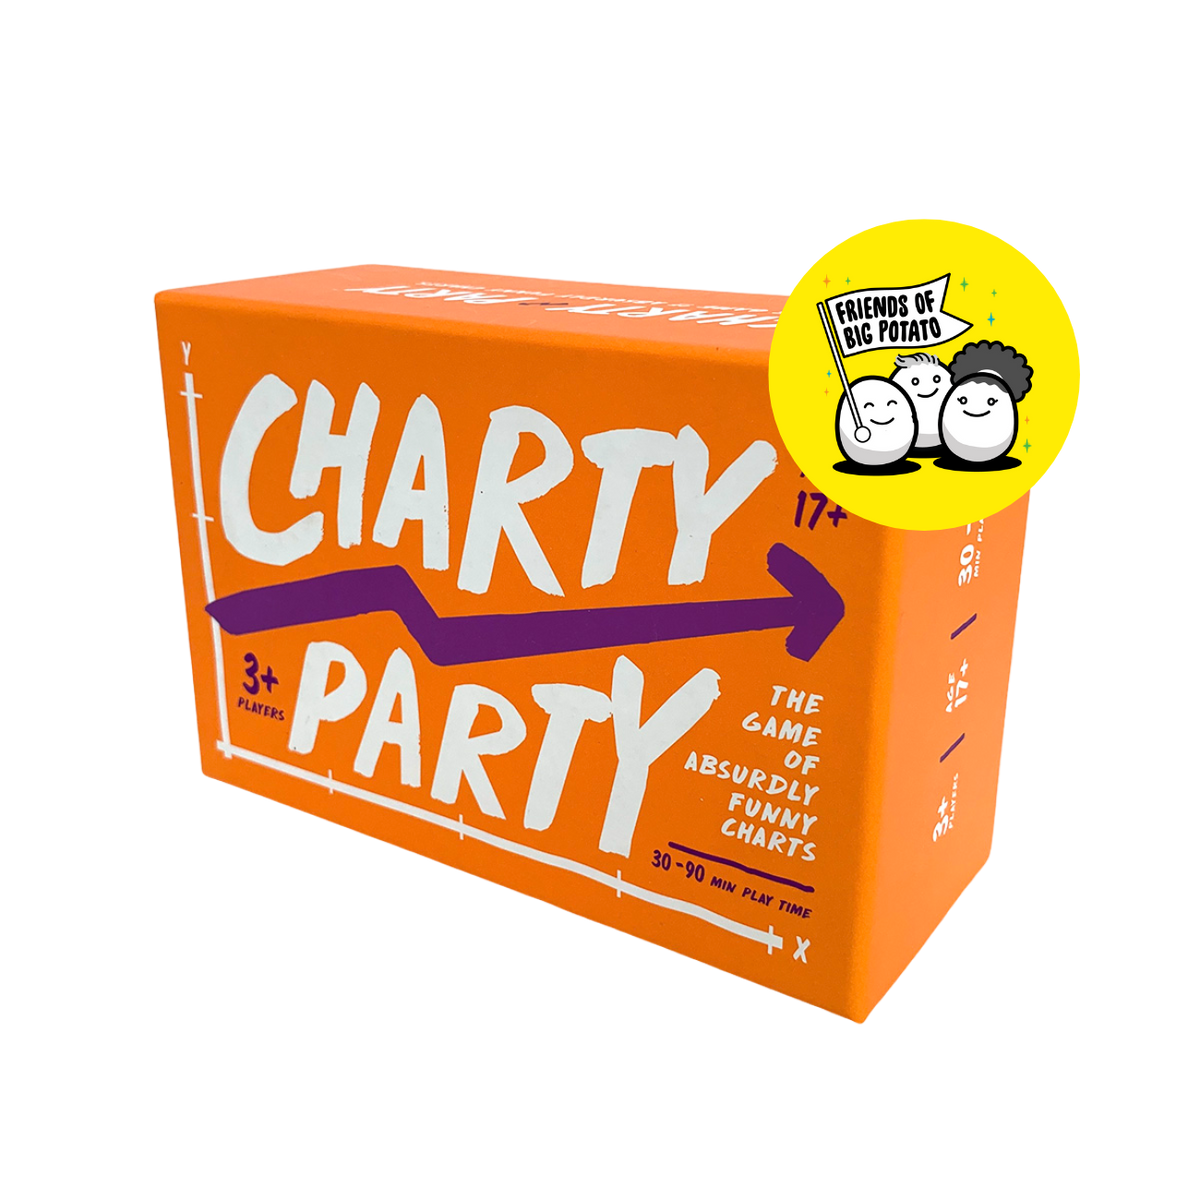 Charty Party game box